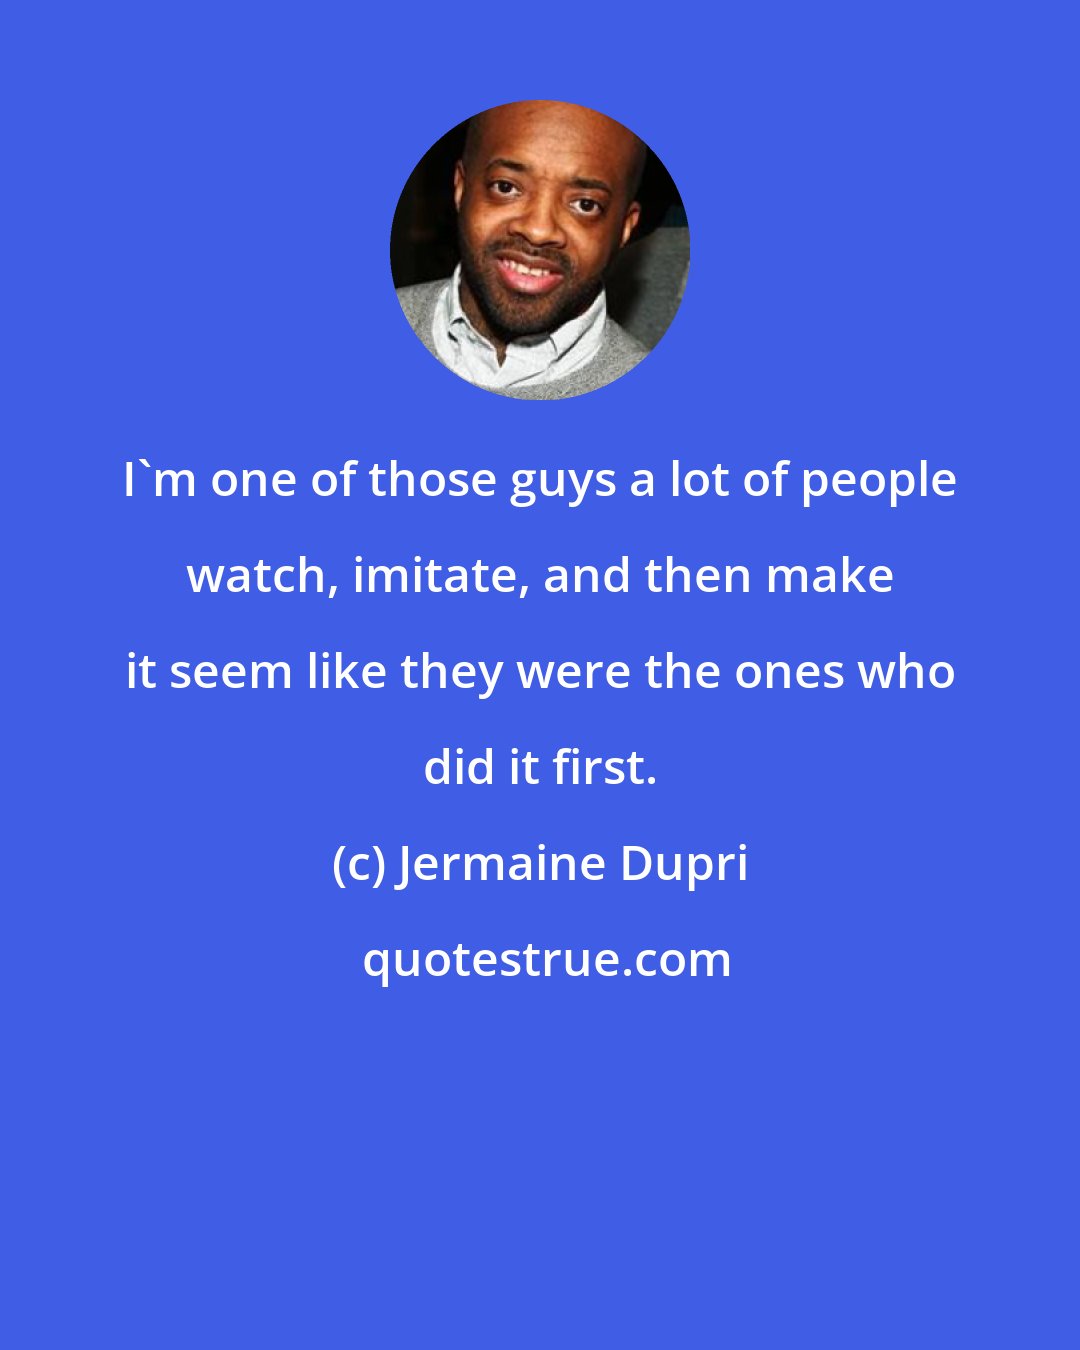 Jermaine Dupri: I'm one of those guys a lot of people watch, imitate, and then make it seem like they were the ones who did it first.